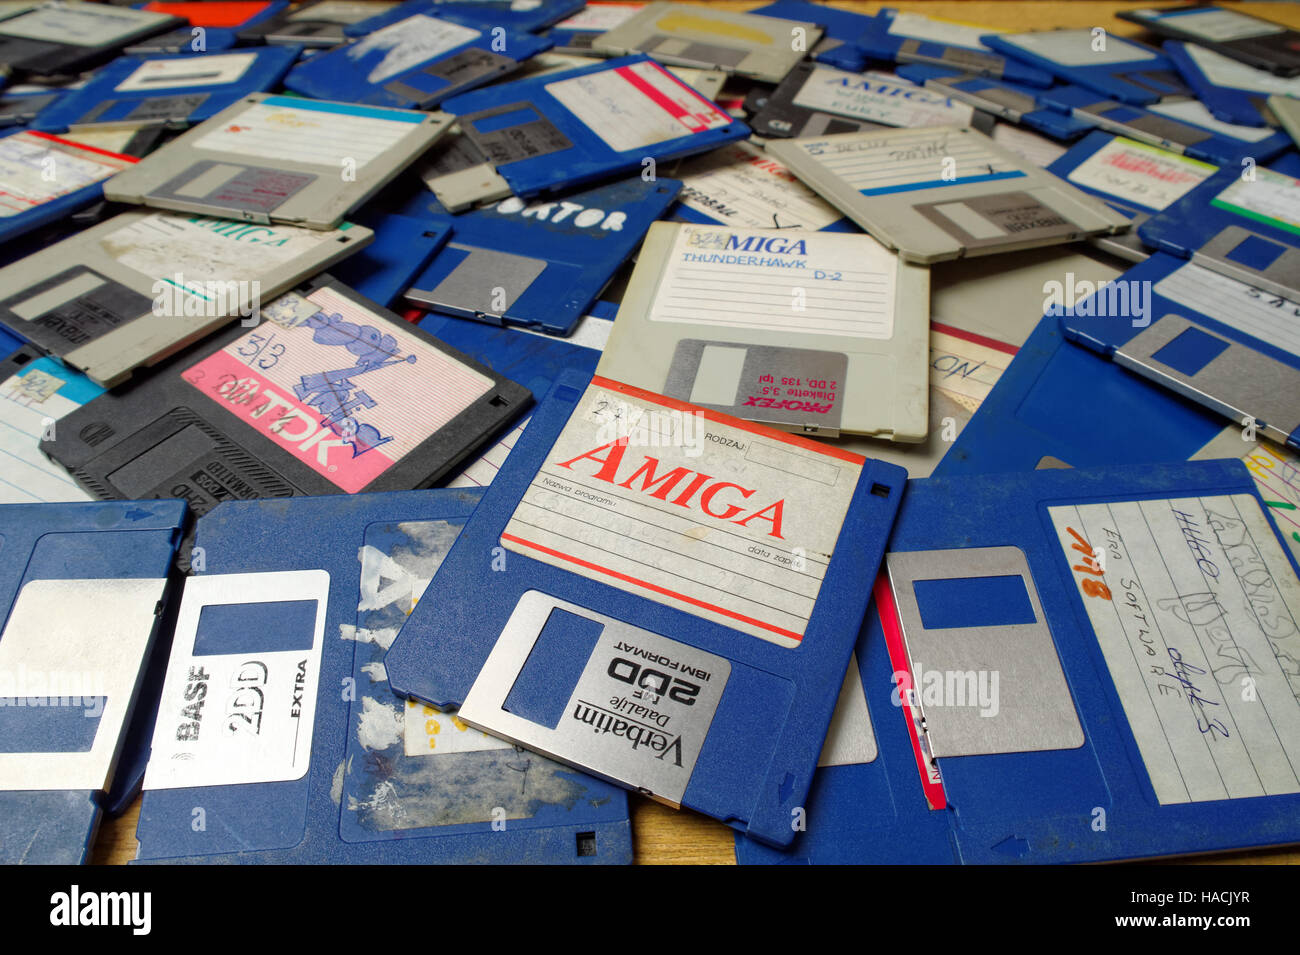 scattered 3.5 inch diskettes for Amiga Stock Photo